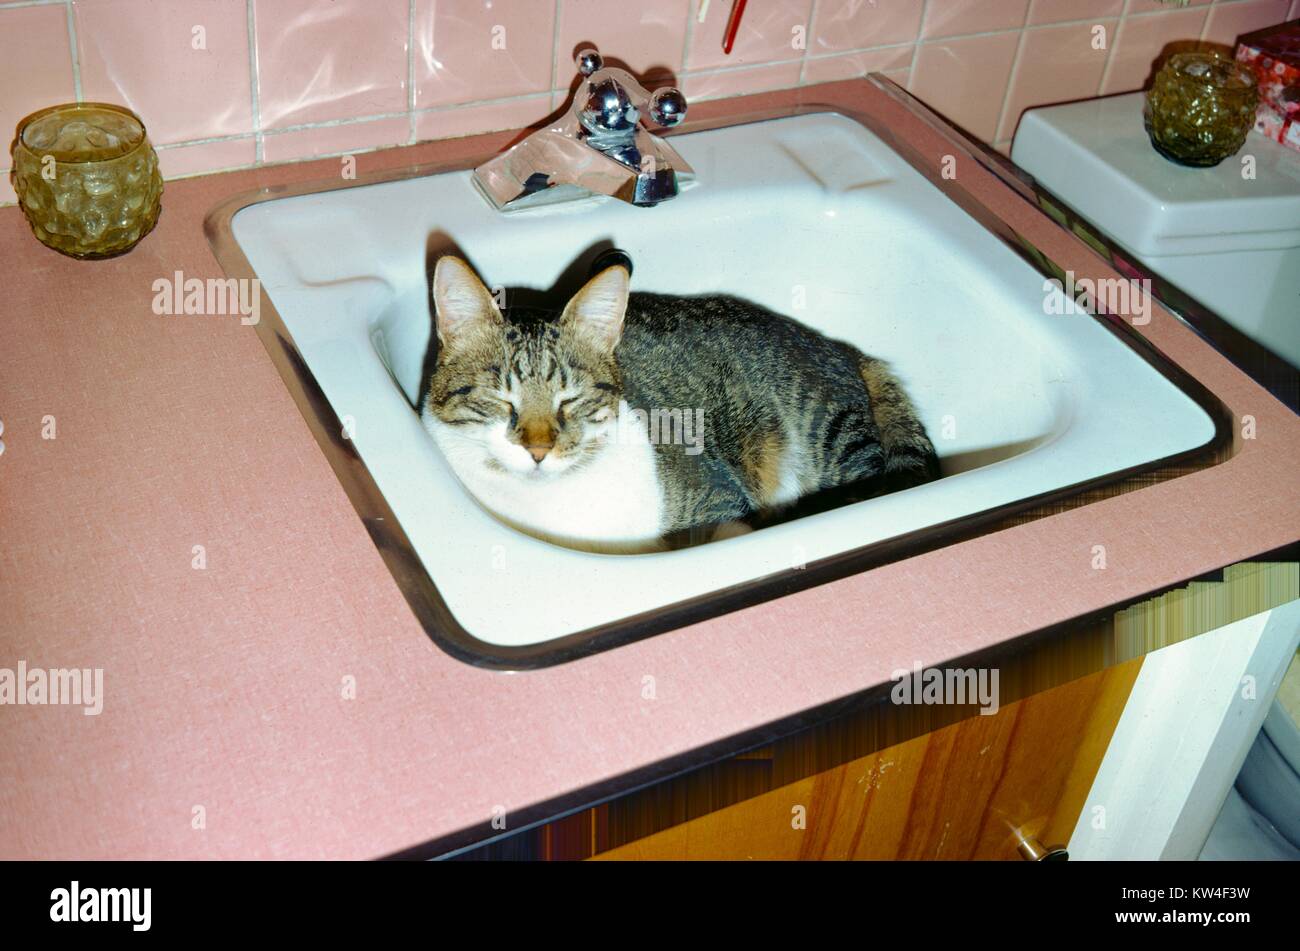 Cat with closed eyes sitting in an empty sink with pink countertops, 1970. Stock Photo